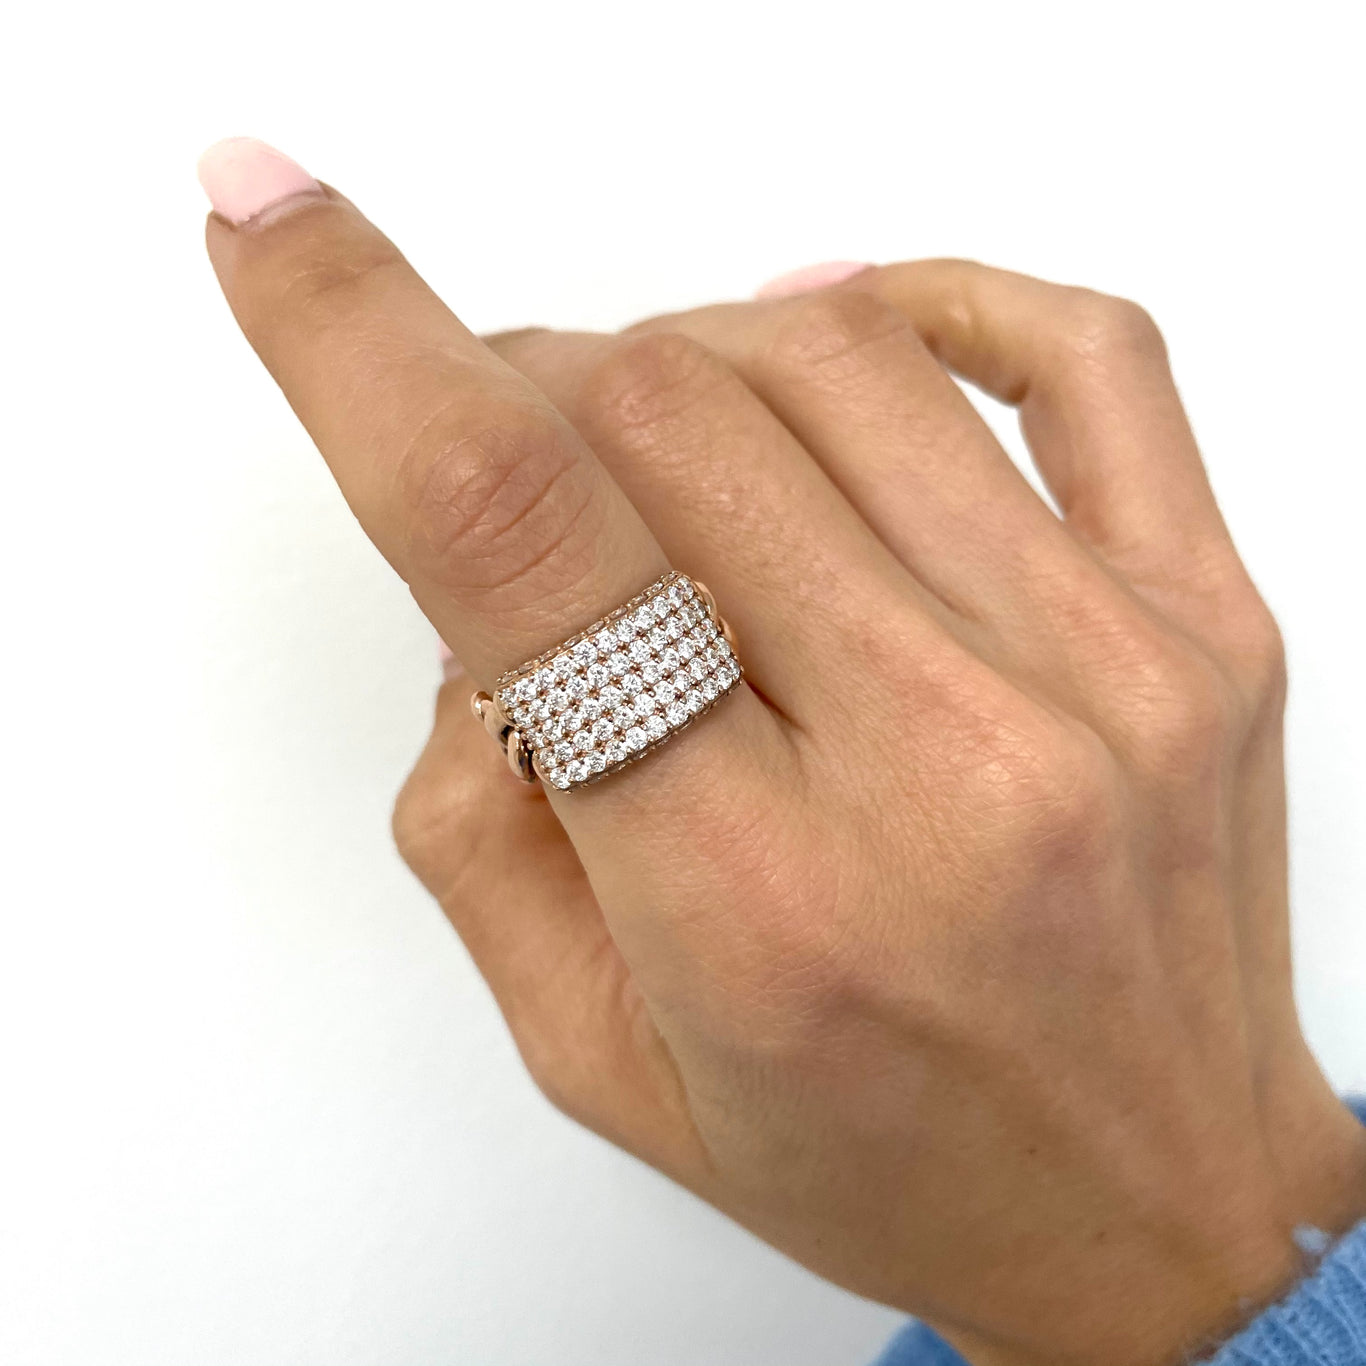 Diamond ID Link Ring shown in Rose Gold